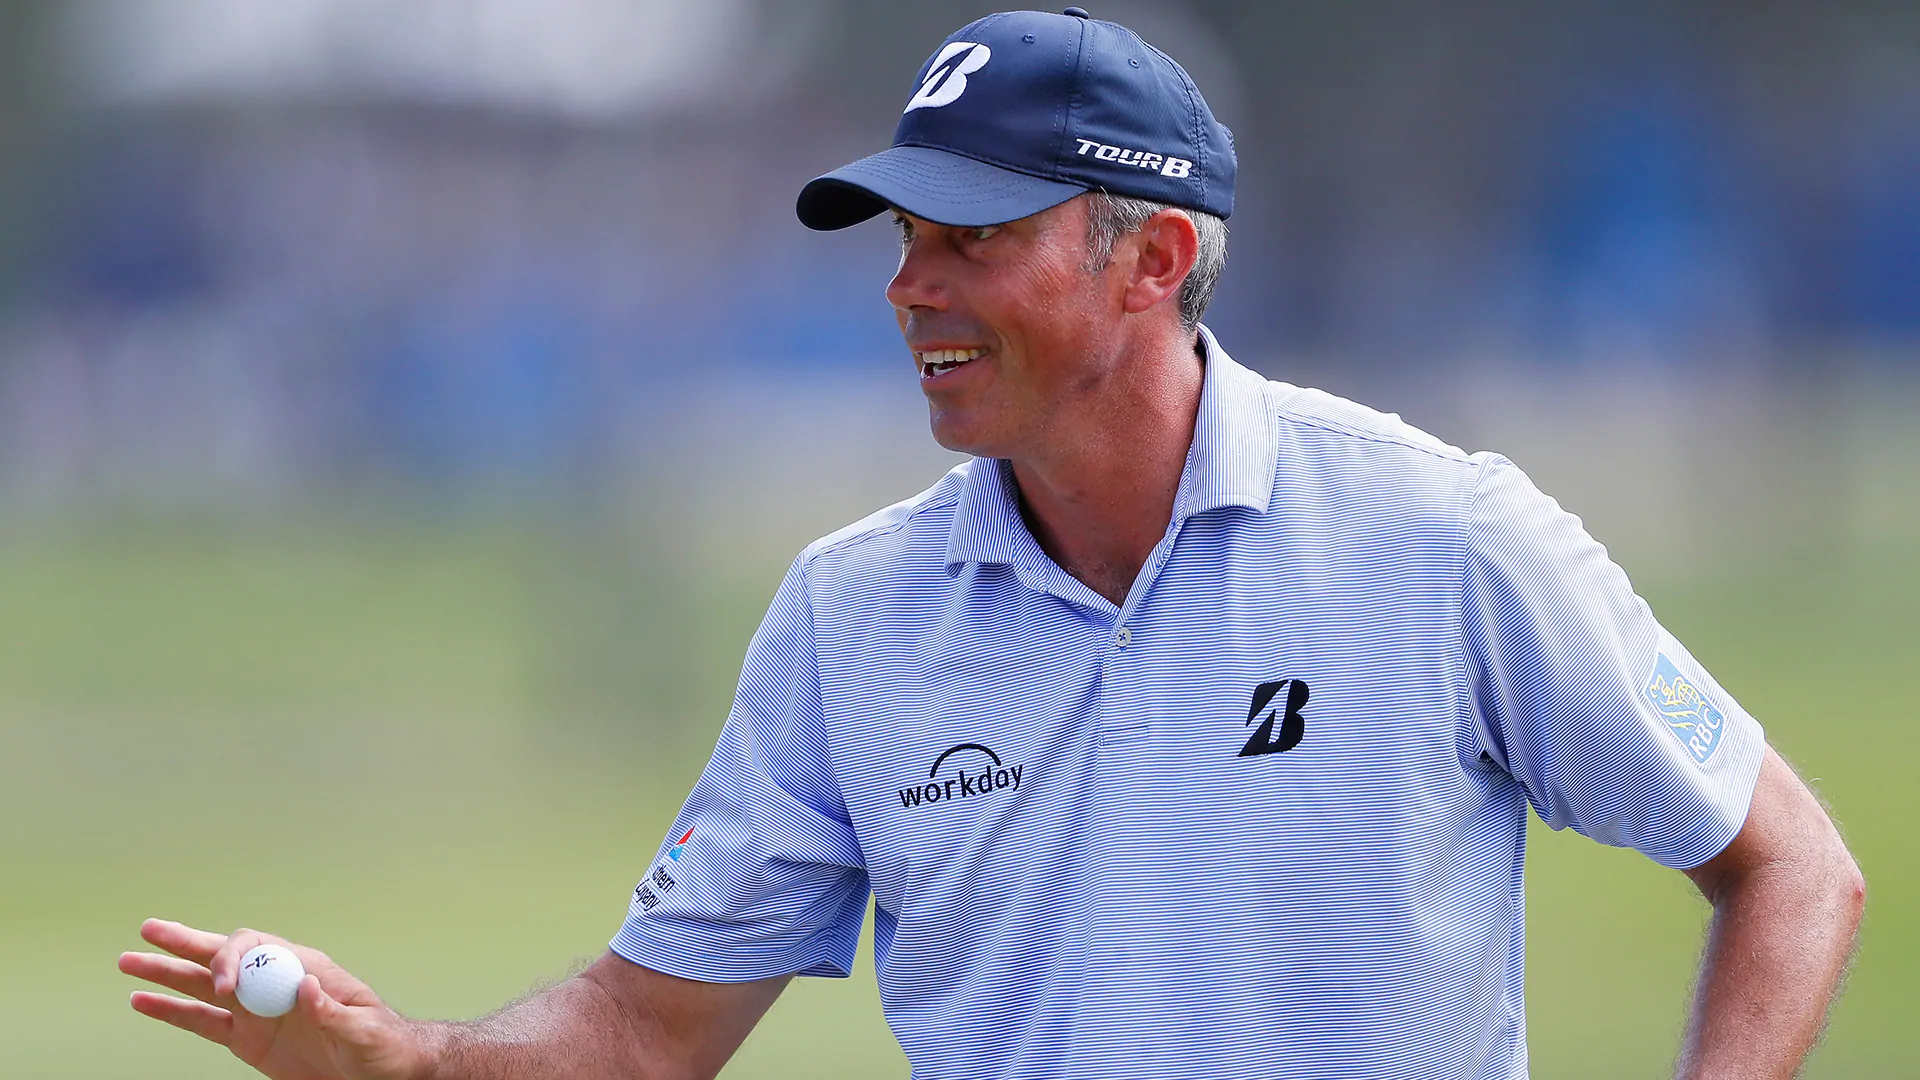 Kuchar not stressing as he attempts to close out Sony Open win